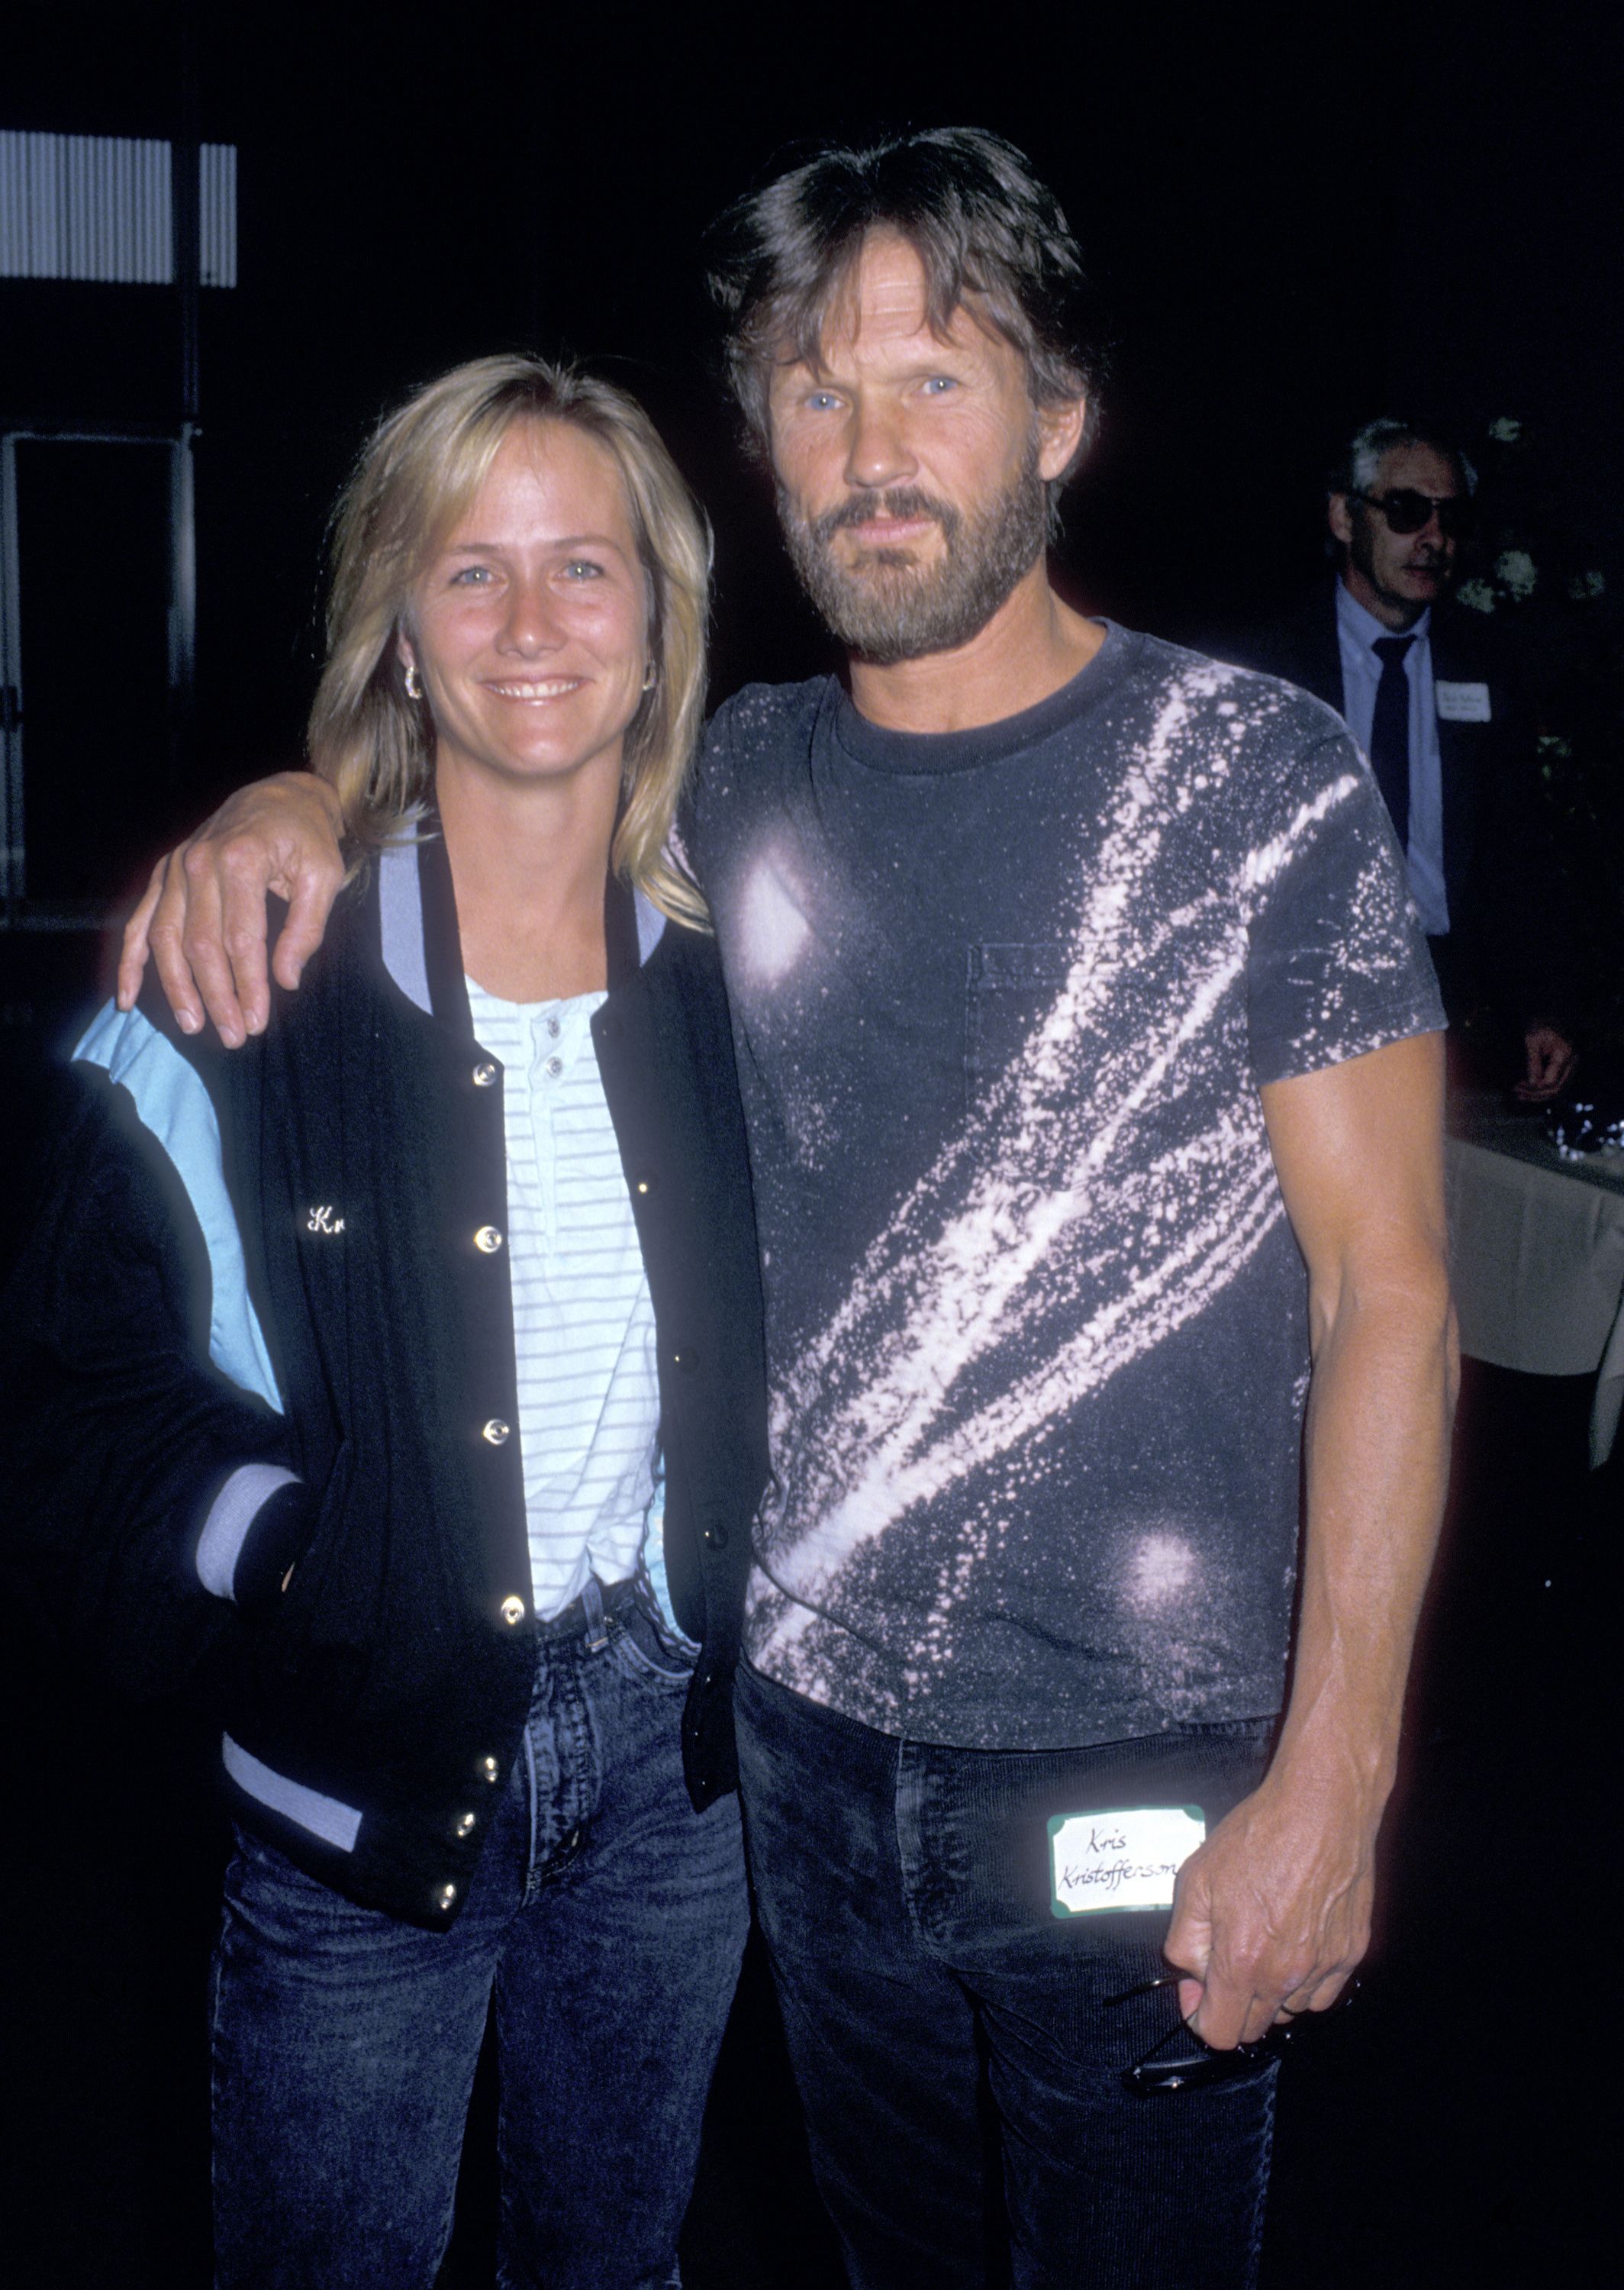 Kris Kristofferson and Lisa Meyers during the "Coverup: Behind the Iran Contra Affair" West Hollywood Premiere on June 24, 1988 at DGA Theatre in West Hollywood, California. | Source: Getty Images